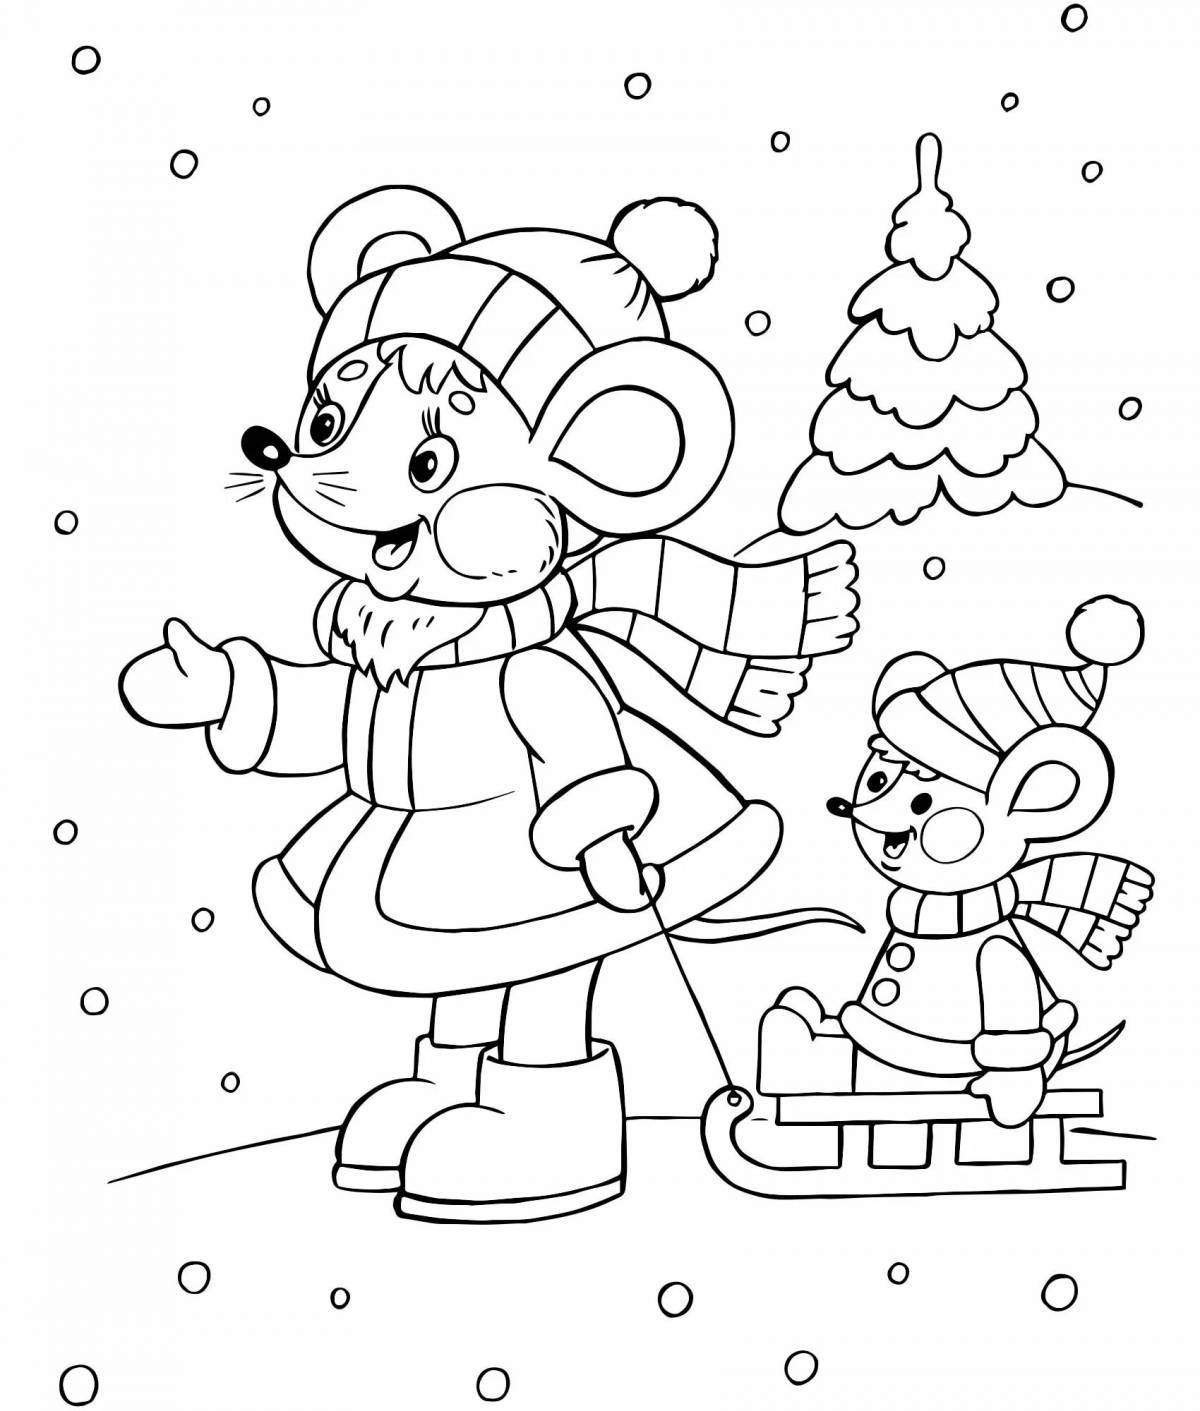 Funny coloring book for children 3 years old winter